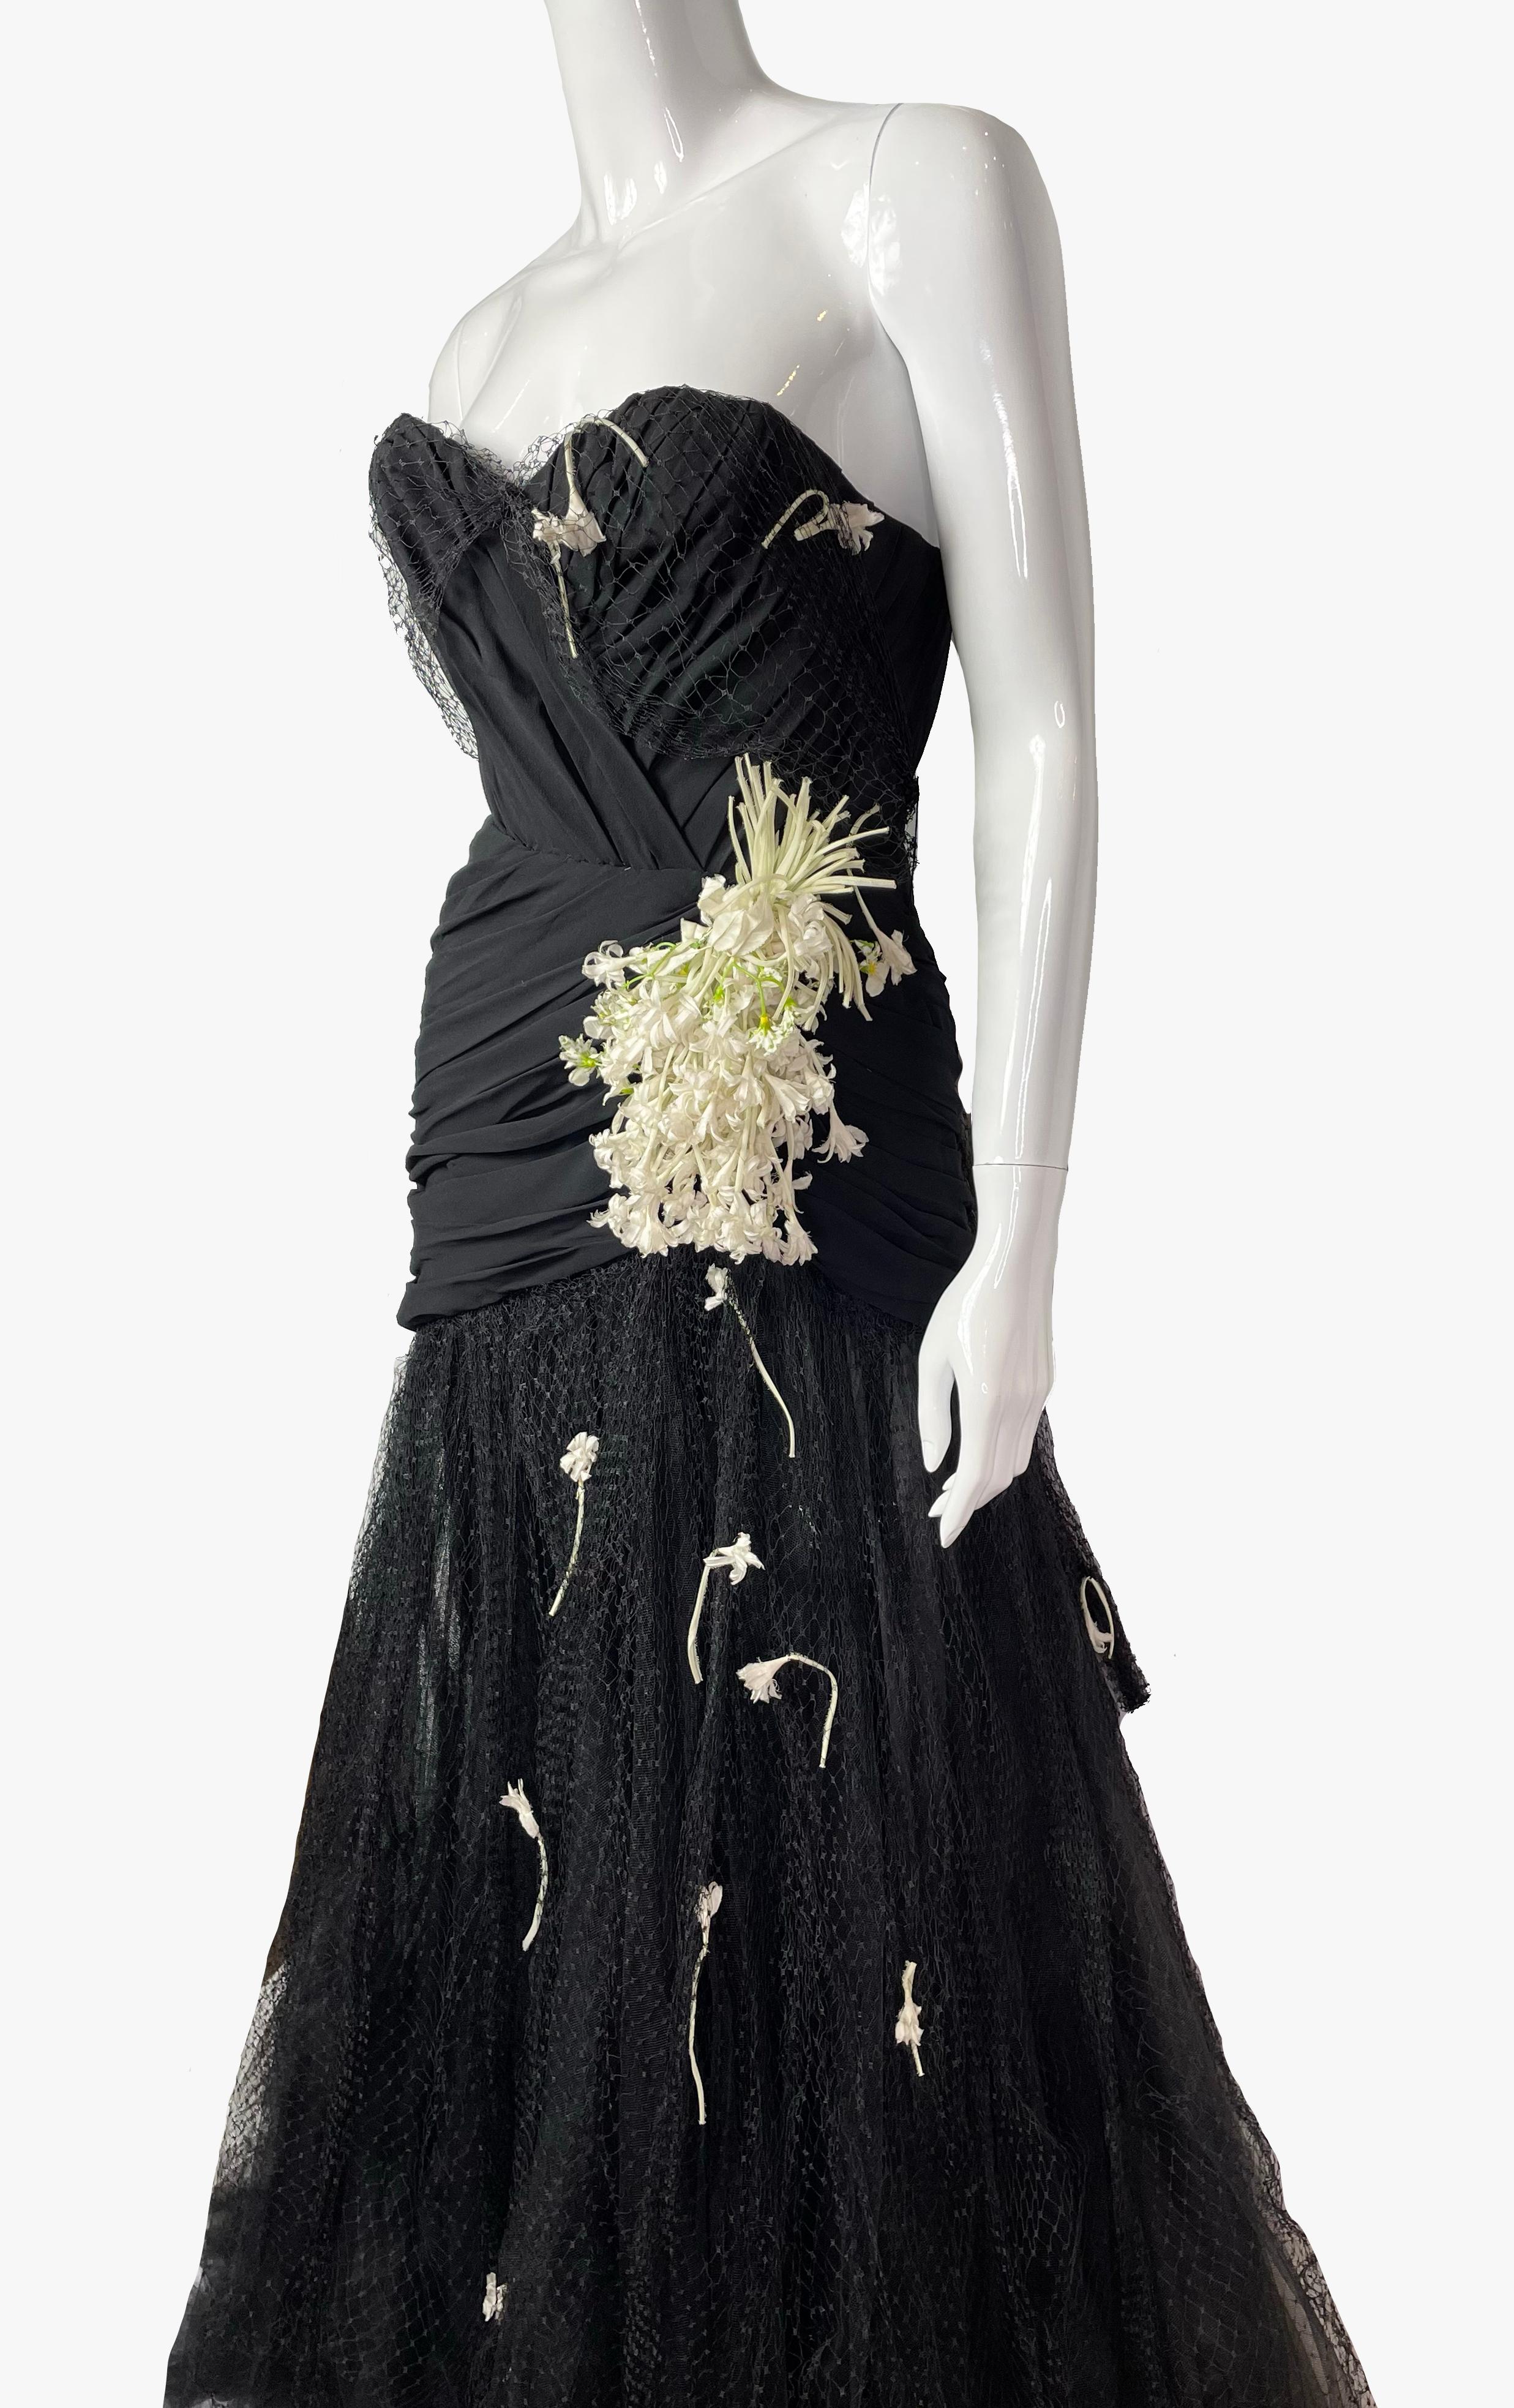 Tan Giudicelli vintage bustier black couture gown, 1980s In Fair Condition For Sale In New York, NY